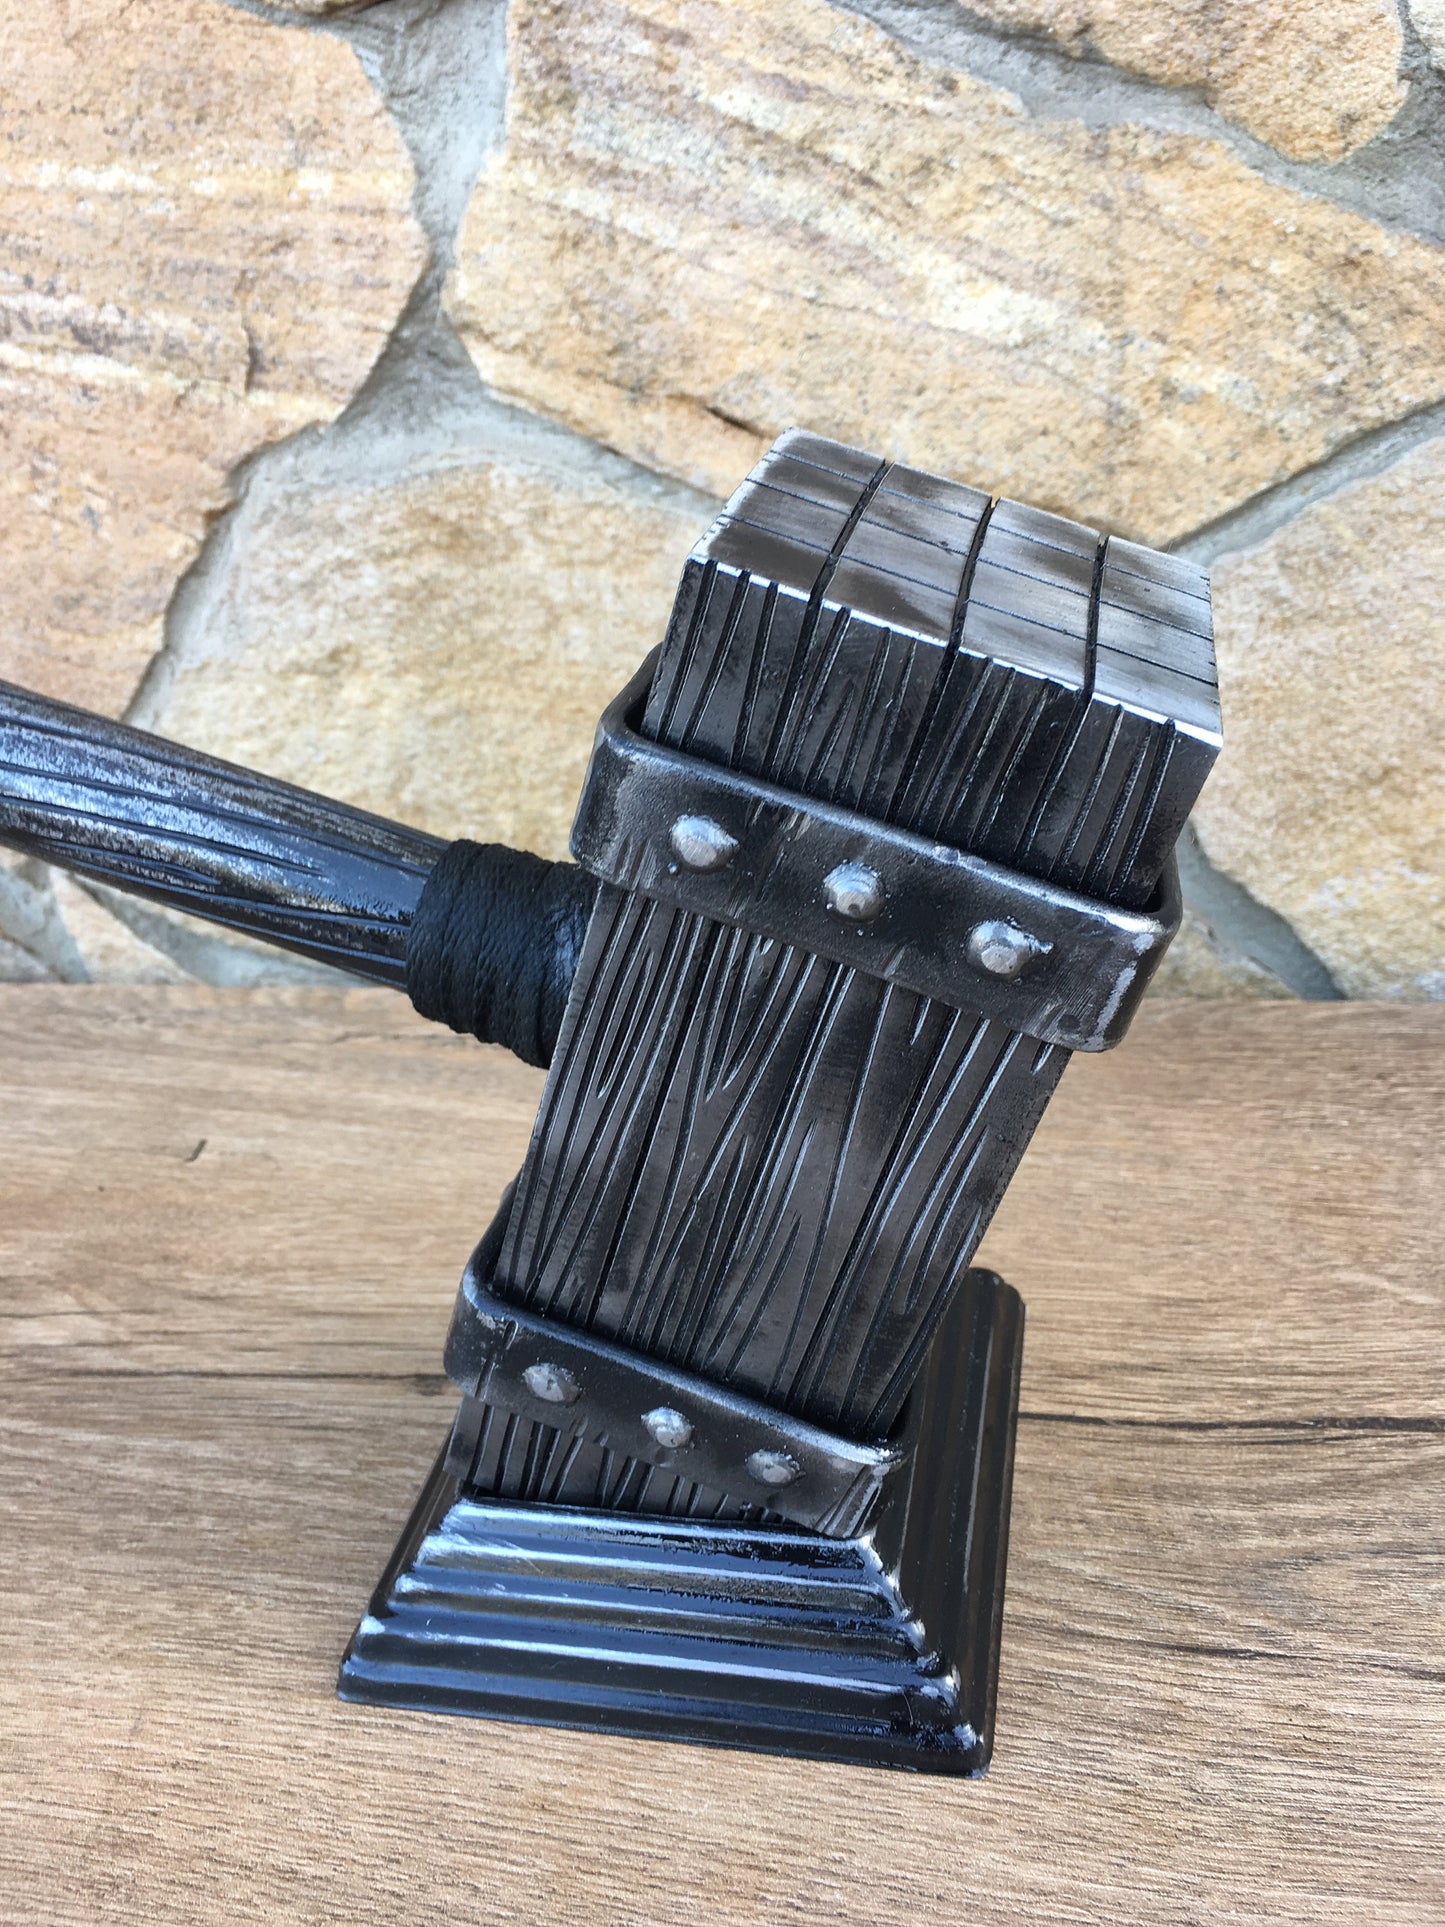 Hammer, unique hammer, viking tools, home decor, Christmas gift, viking hammer, mens gift, iron gift for him, military gift, iron gifts